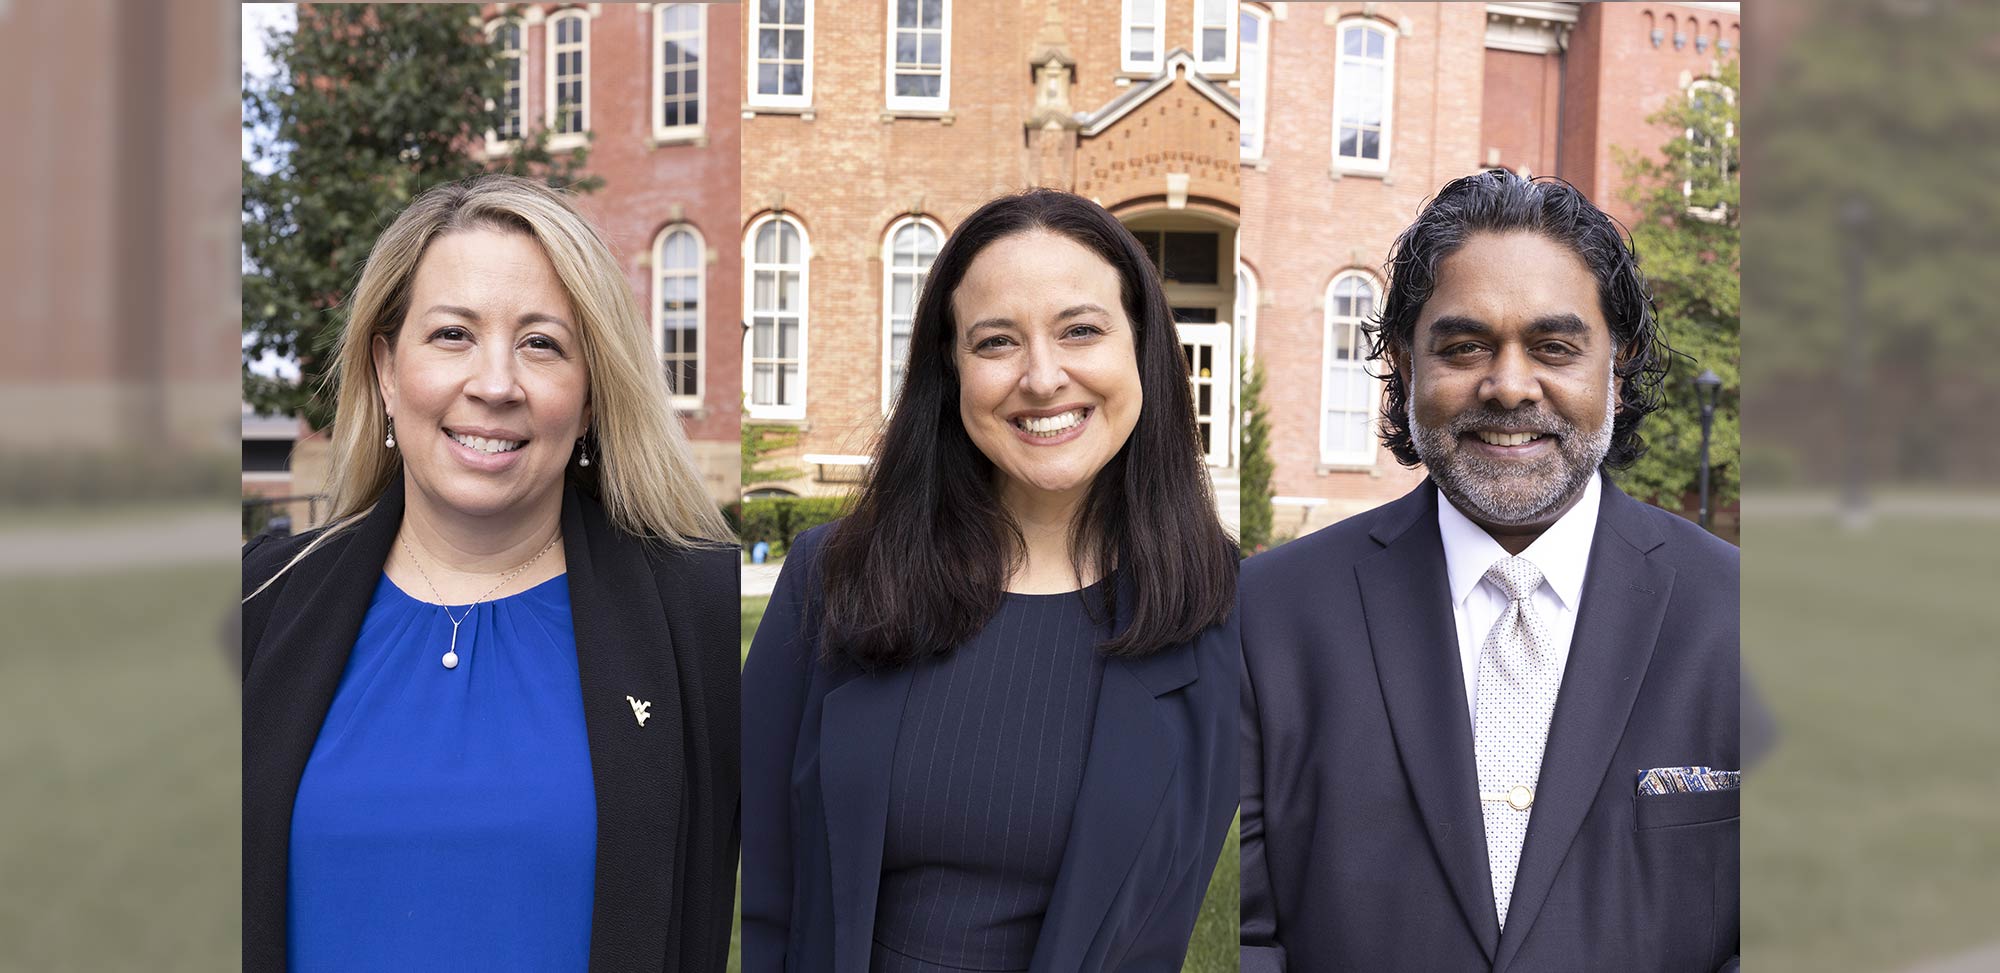 Eberly Welcomes Three Assistant Deans to its Leadership Team 